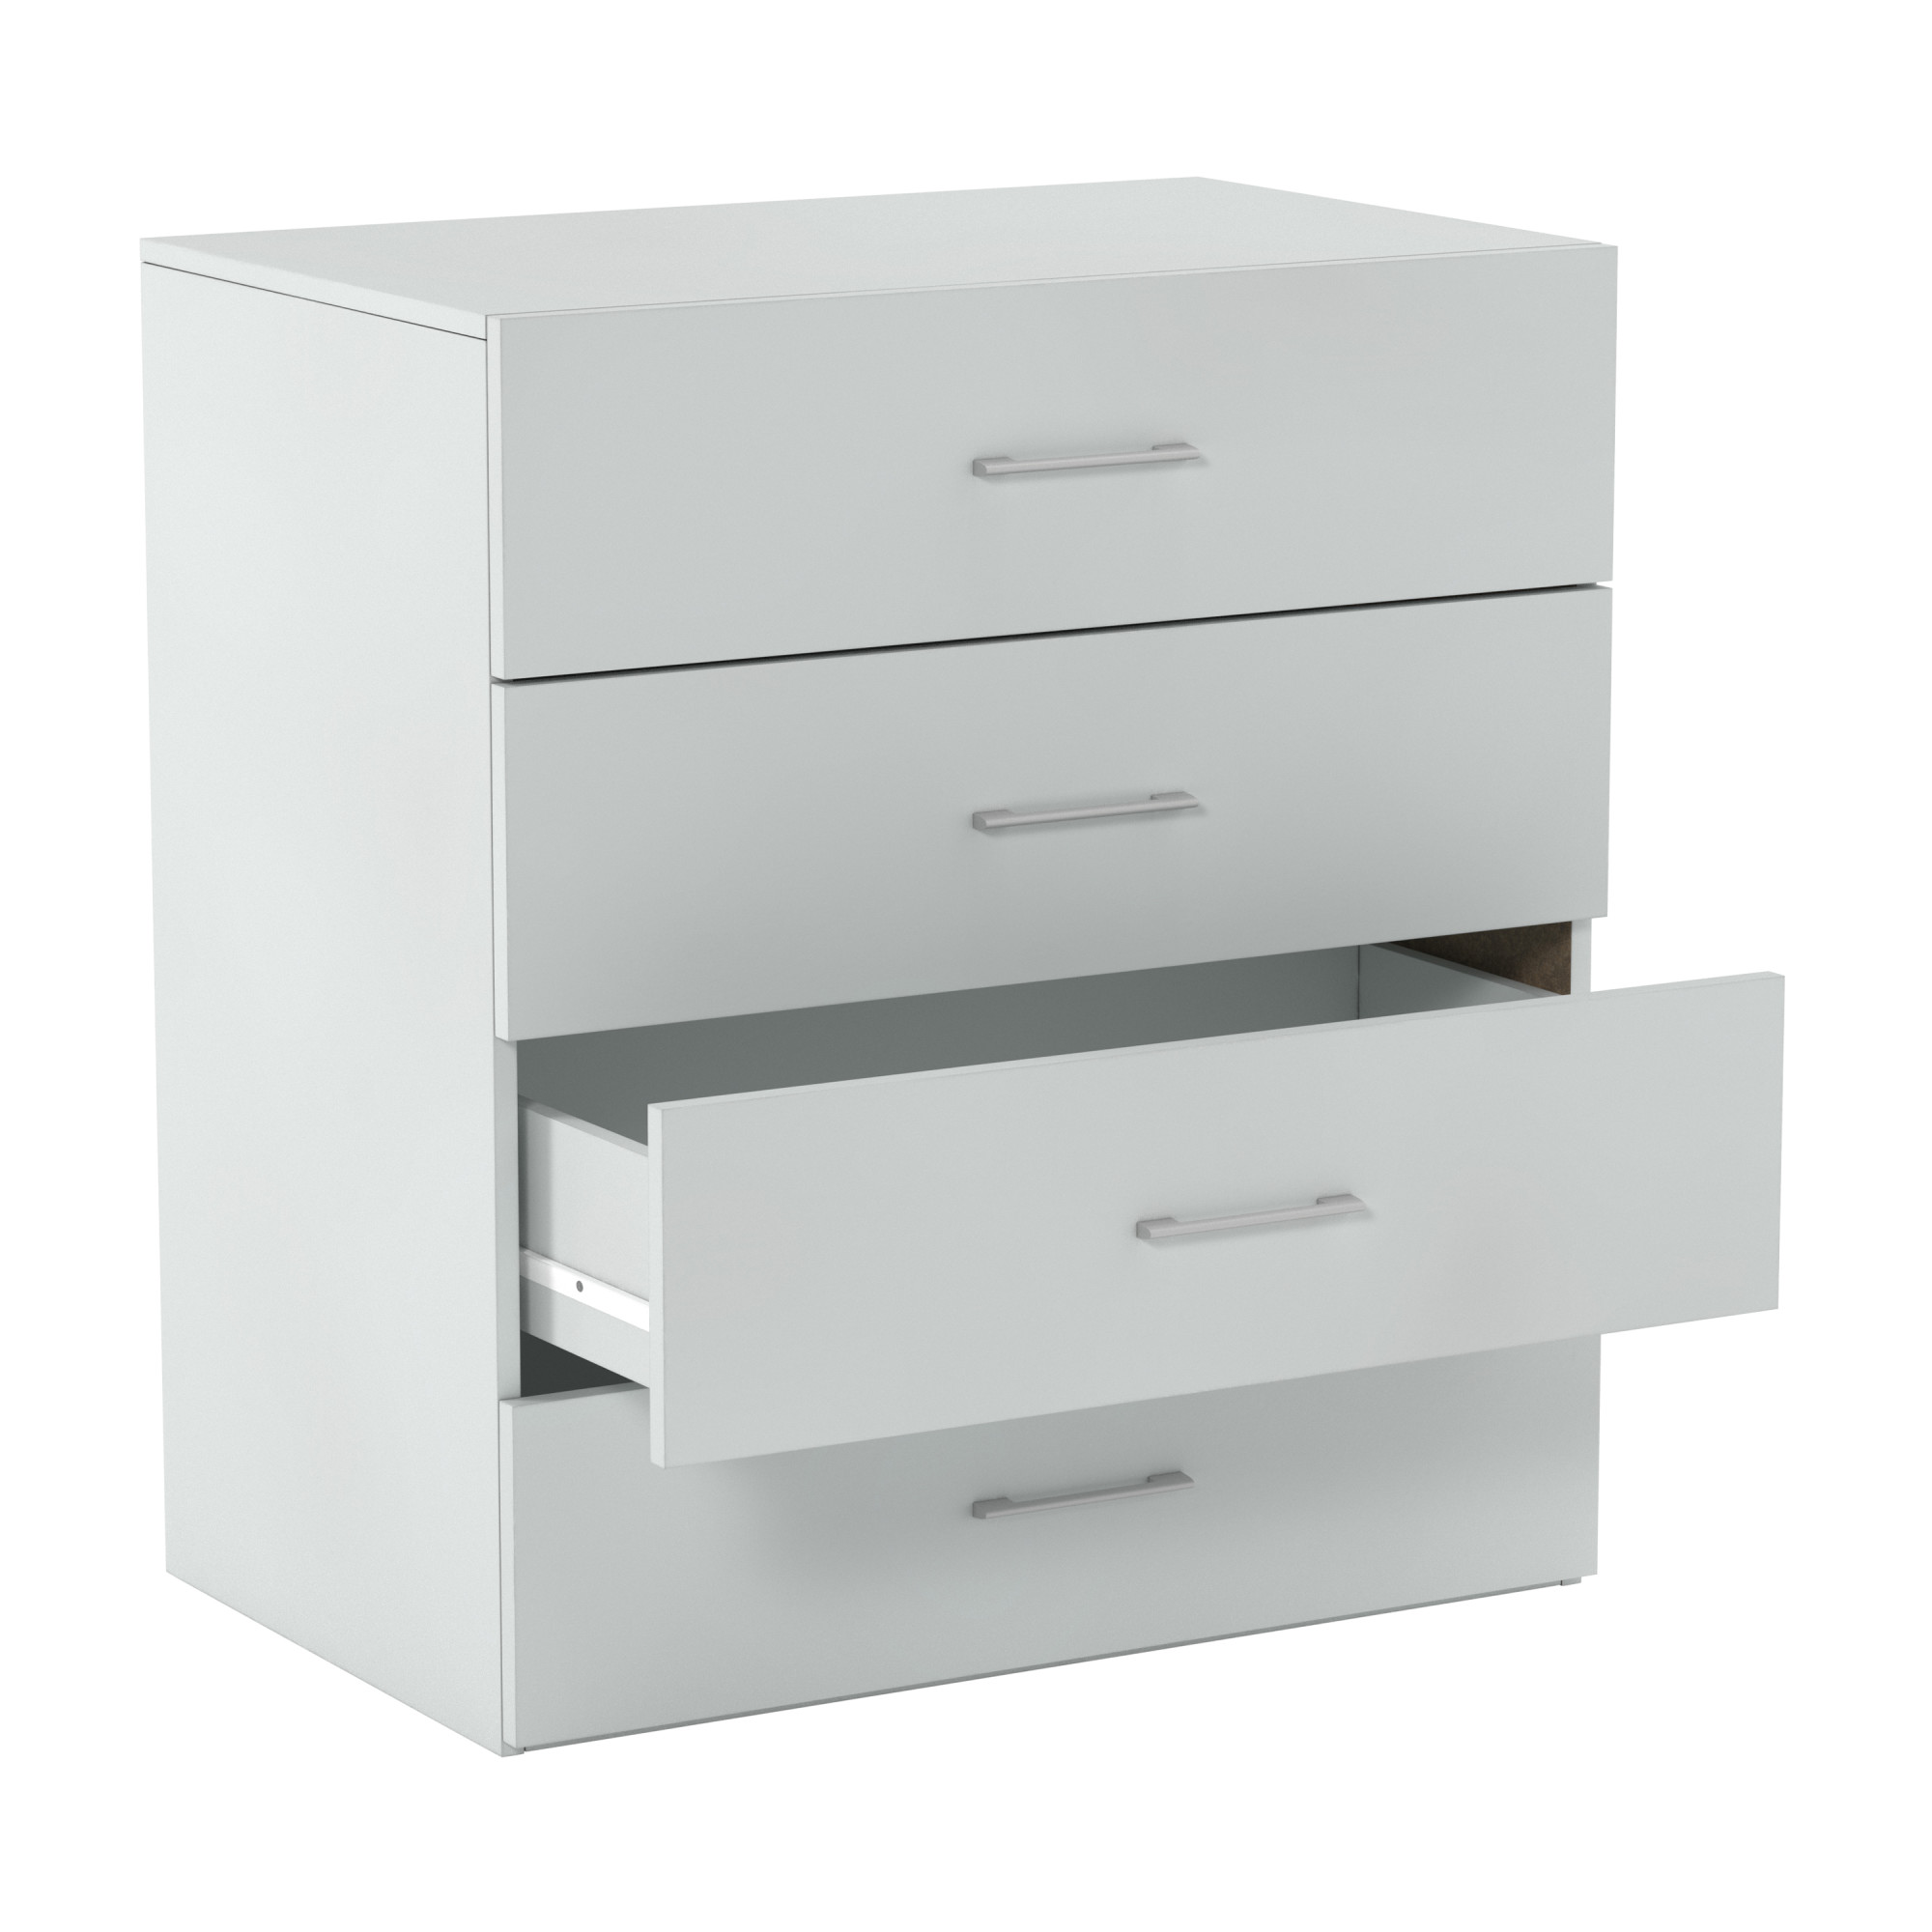 Lundy 4-Drawer Dresser, White, by Hillsdale Living Essentials - image 4 of 17